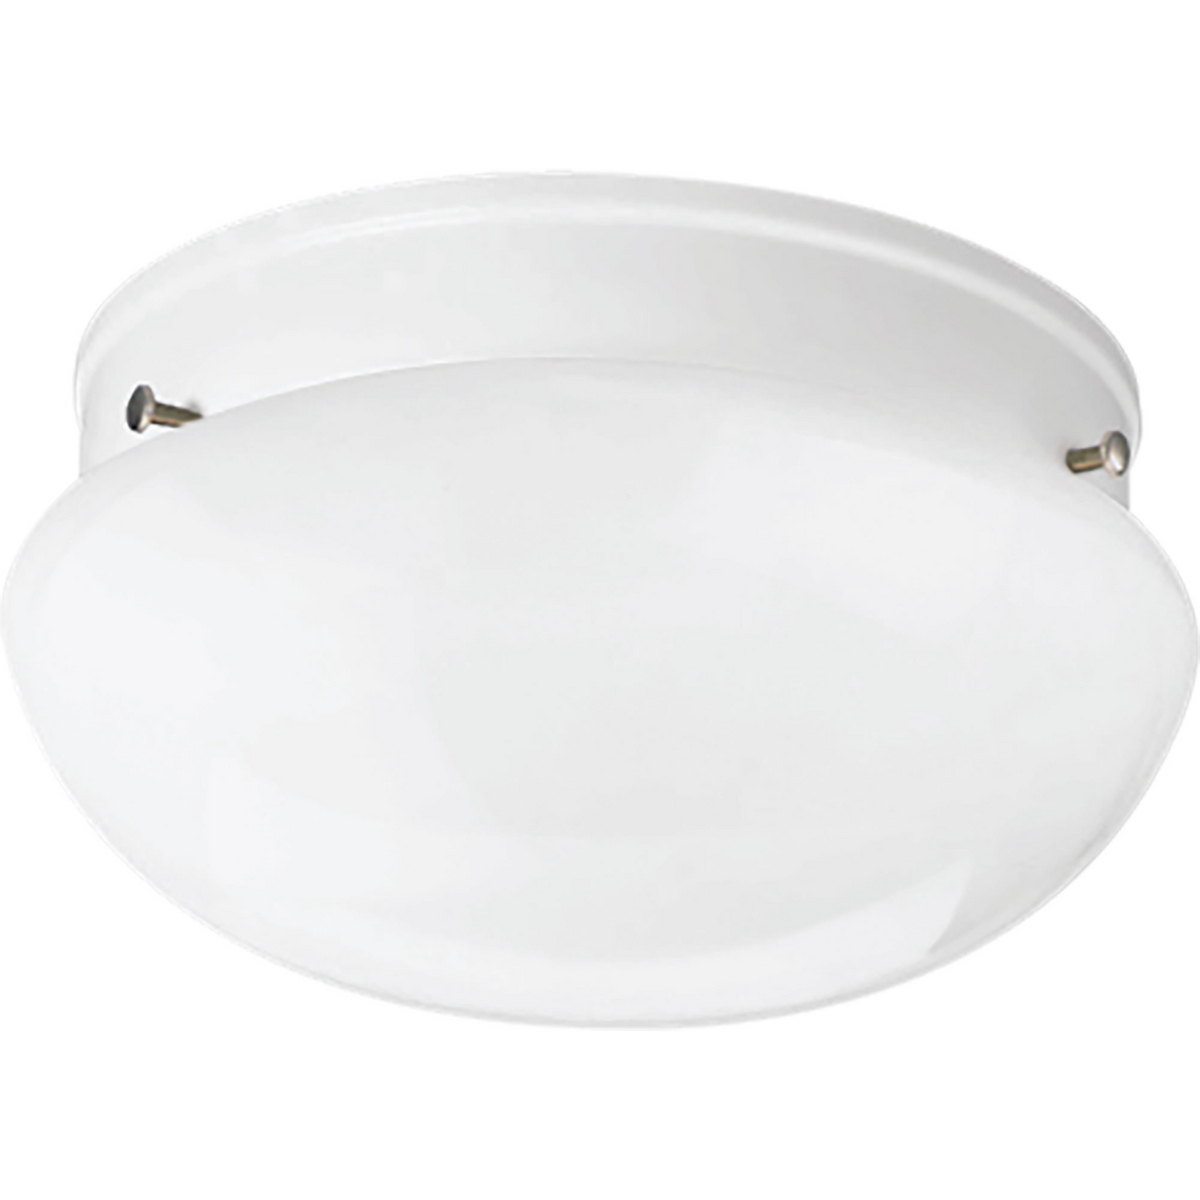 A traditional one-light close-to-ceiling fixture featuring a White glass bowl and a White finish. The fixture is ideal in a bathroom setting or hall/foyer.